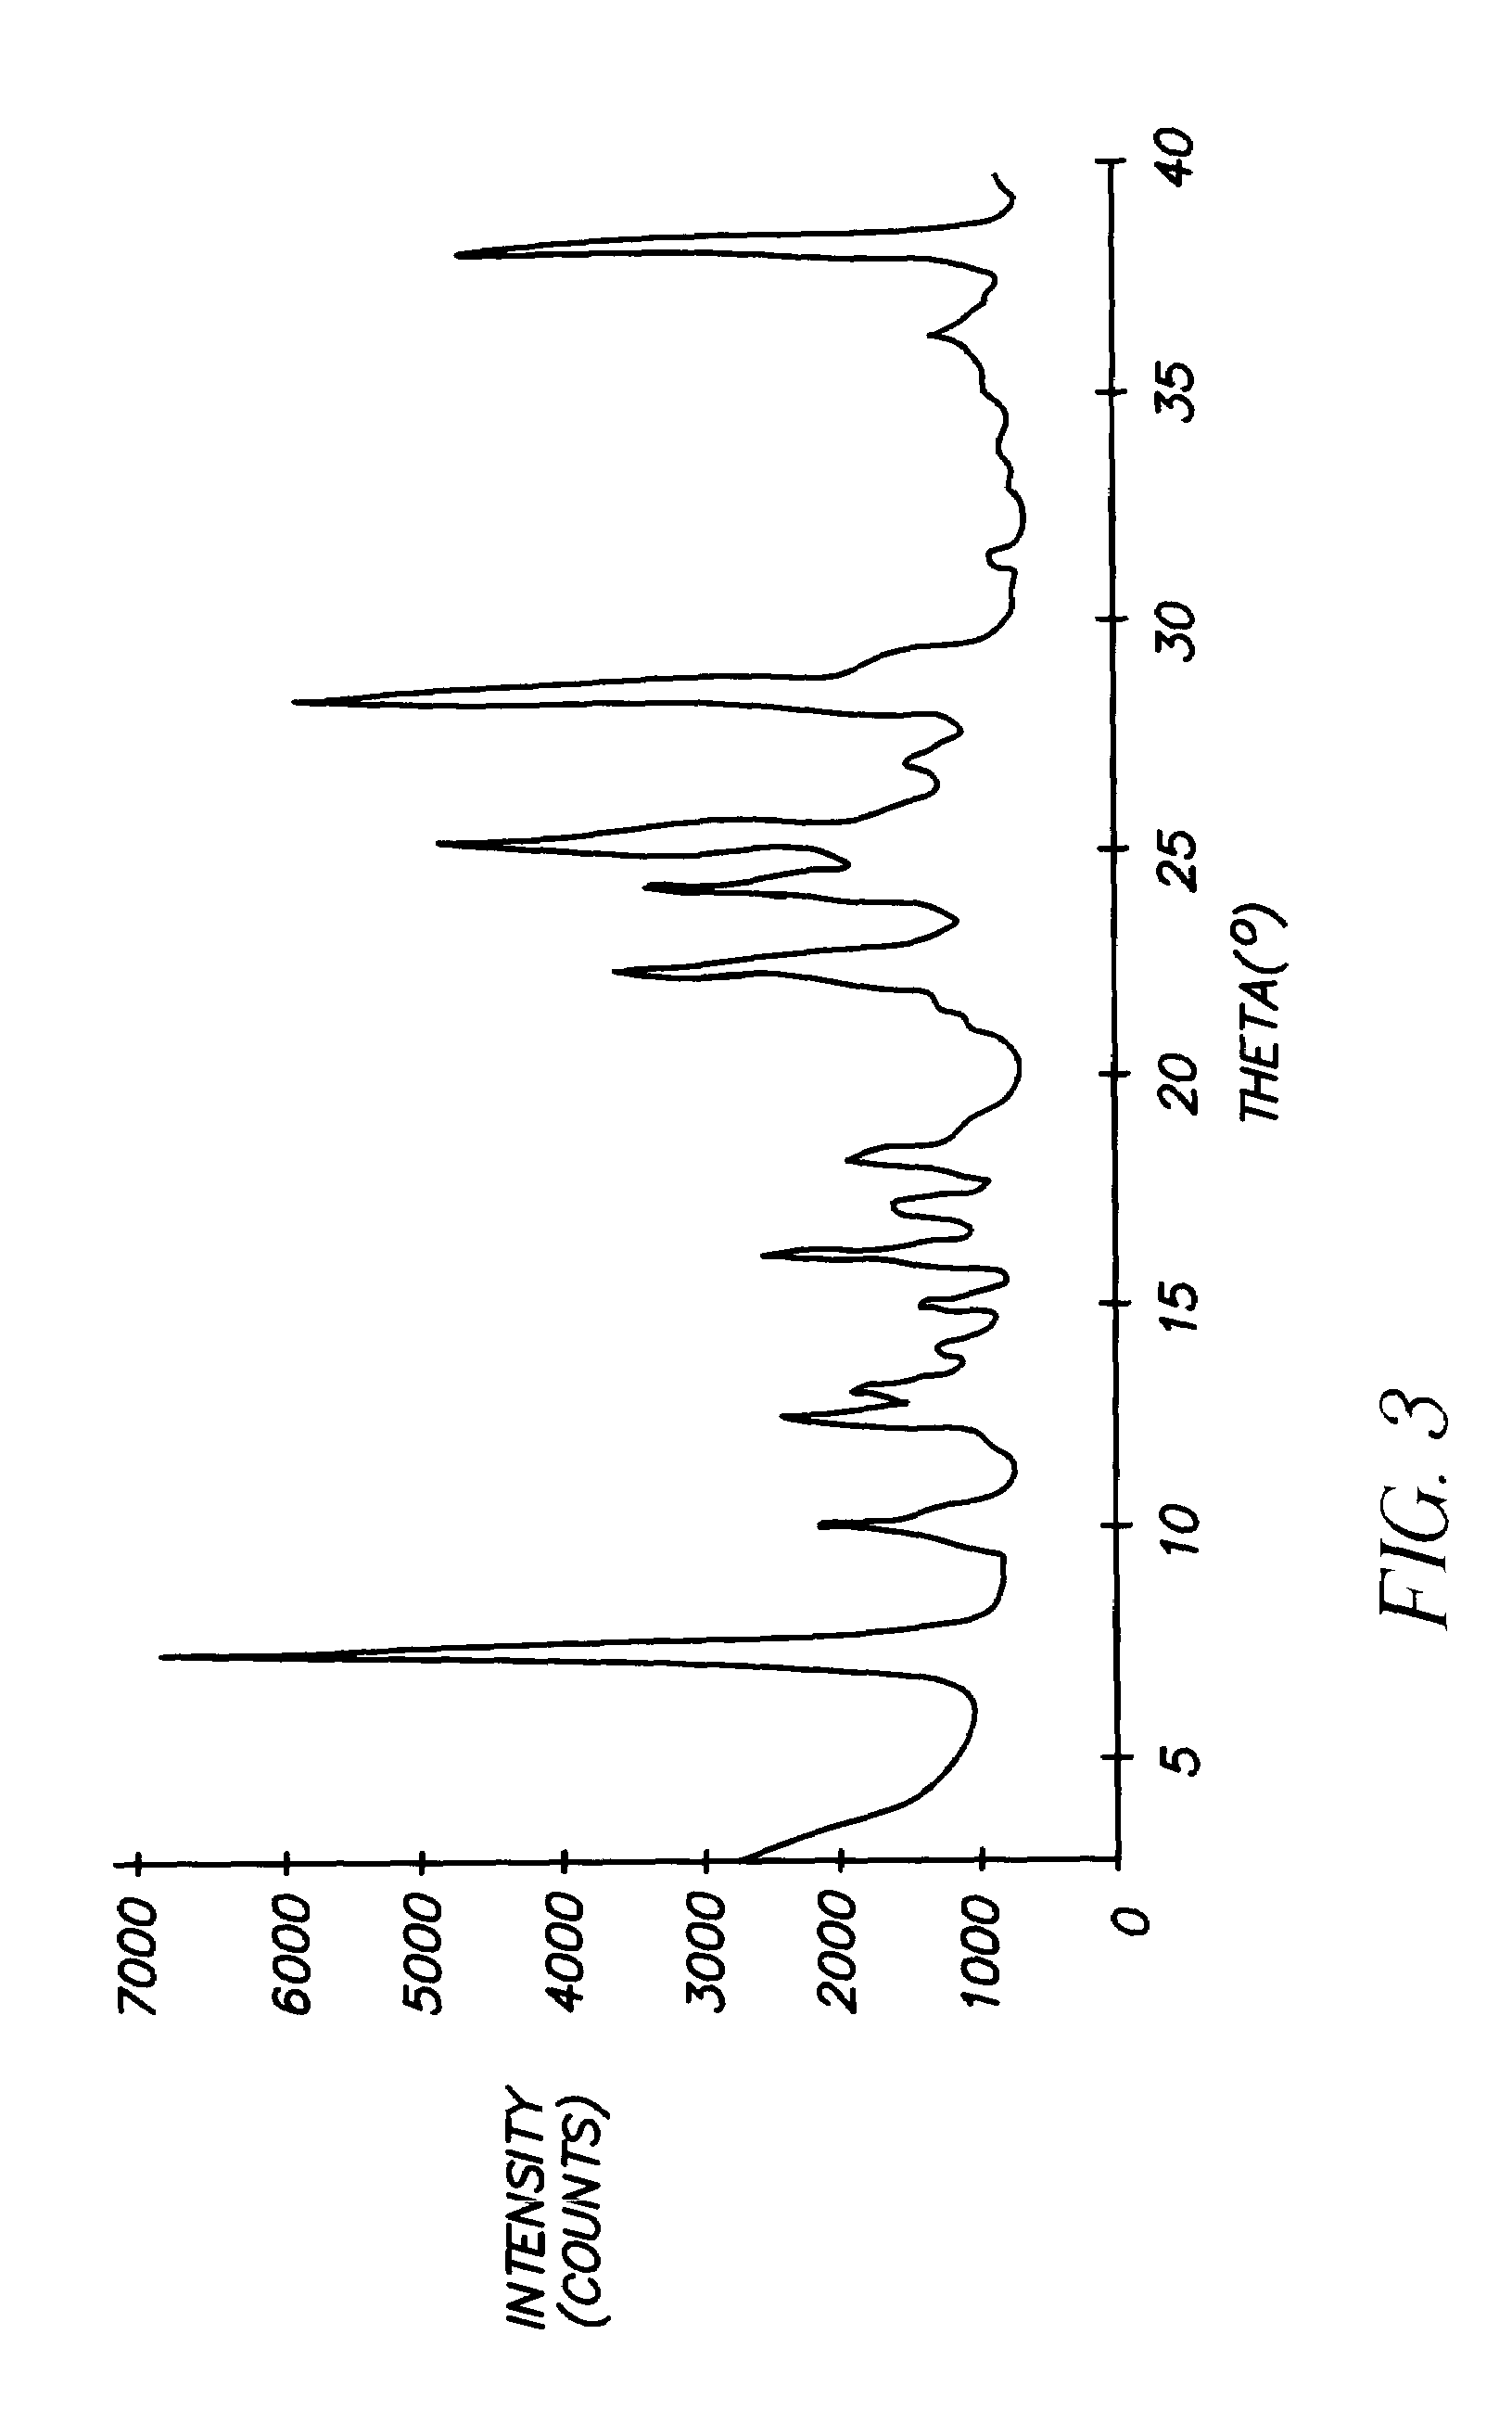 Cocrystals containing high-chlorine titanyl phthalocyanine and low concentration of titanyl fluorophthalocyanine, and electrophotographic element containing same